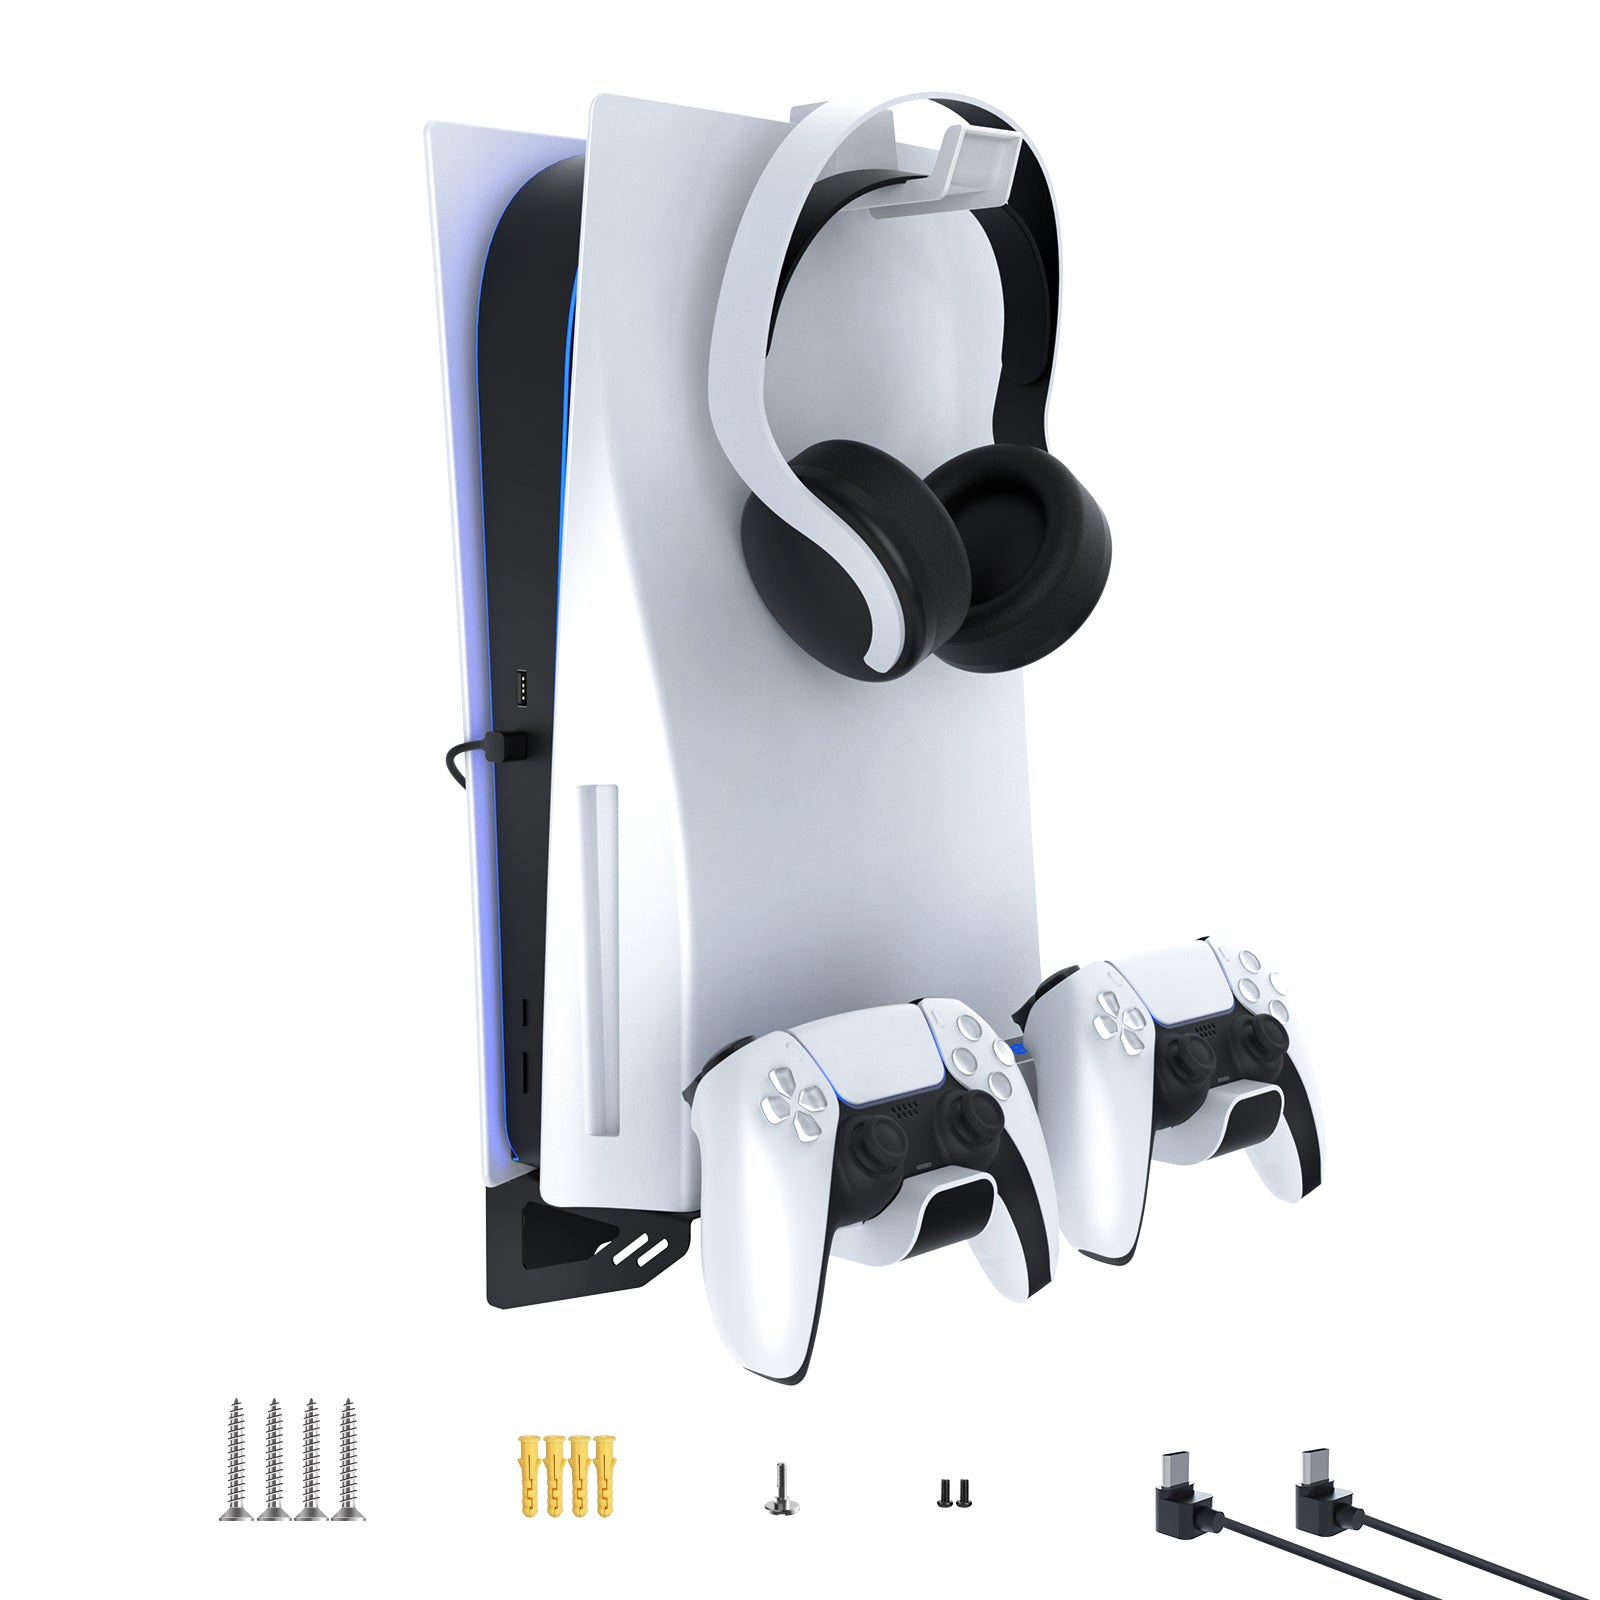 The PS5 Wall Mount Kit includes a charging station, screws, a cable, and a headphone holder.